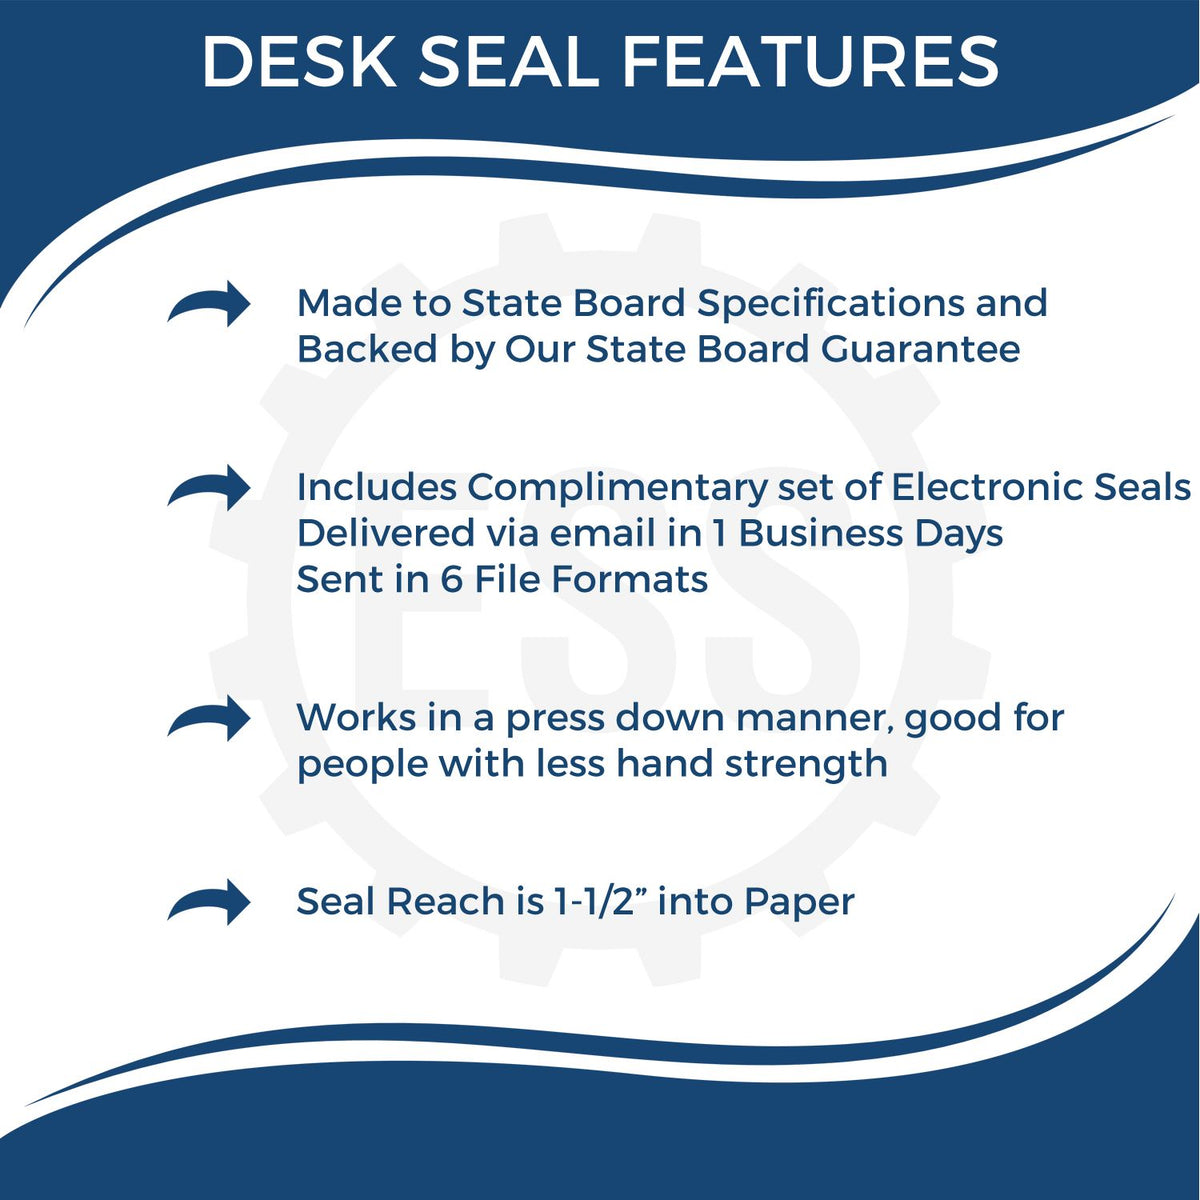 A picture of an infographic highlighting the selling points for the Connecticut Geologist Desk Seal